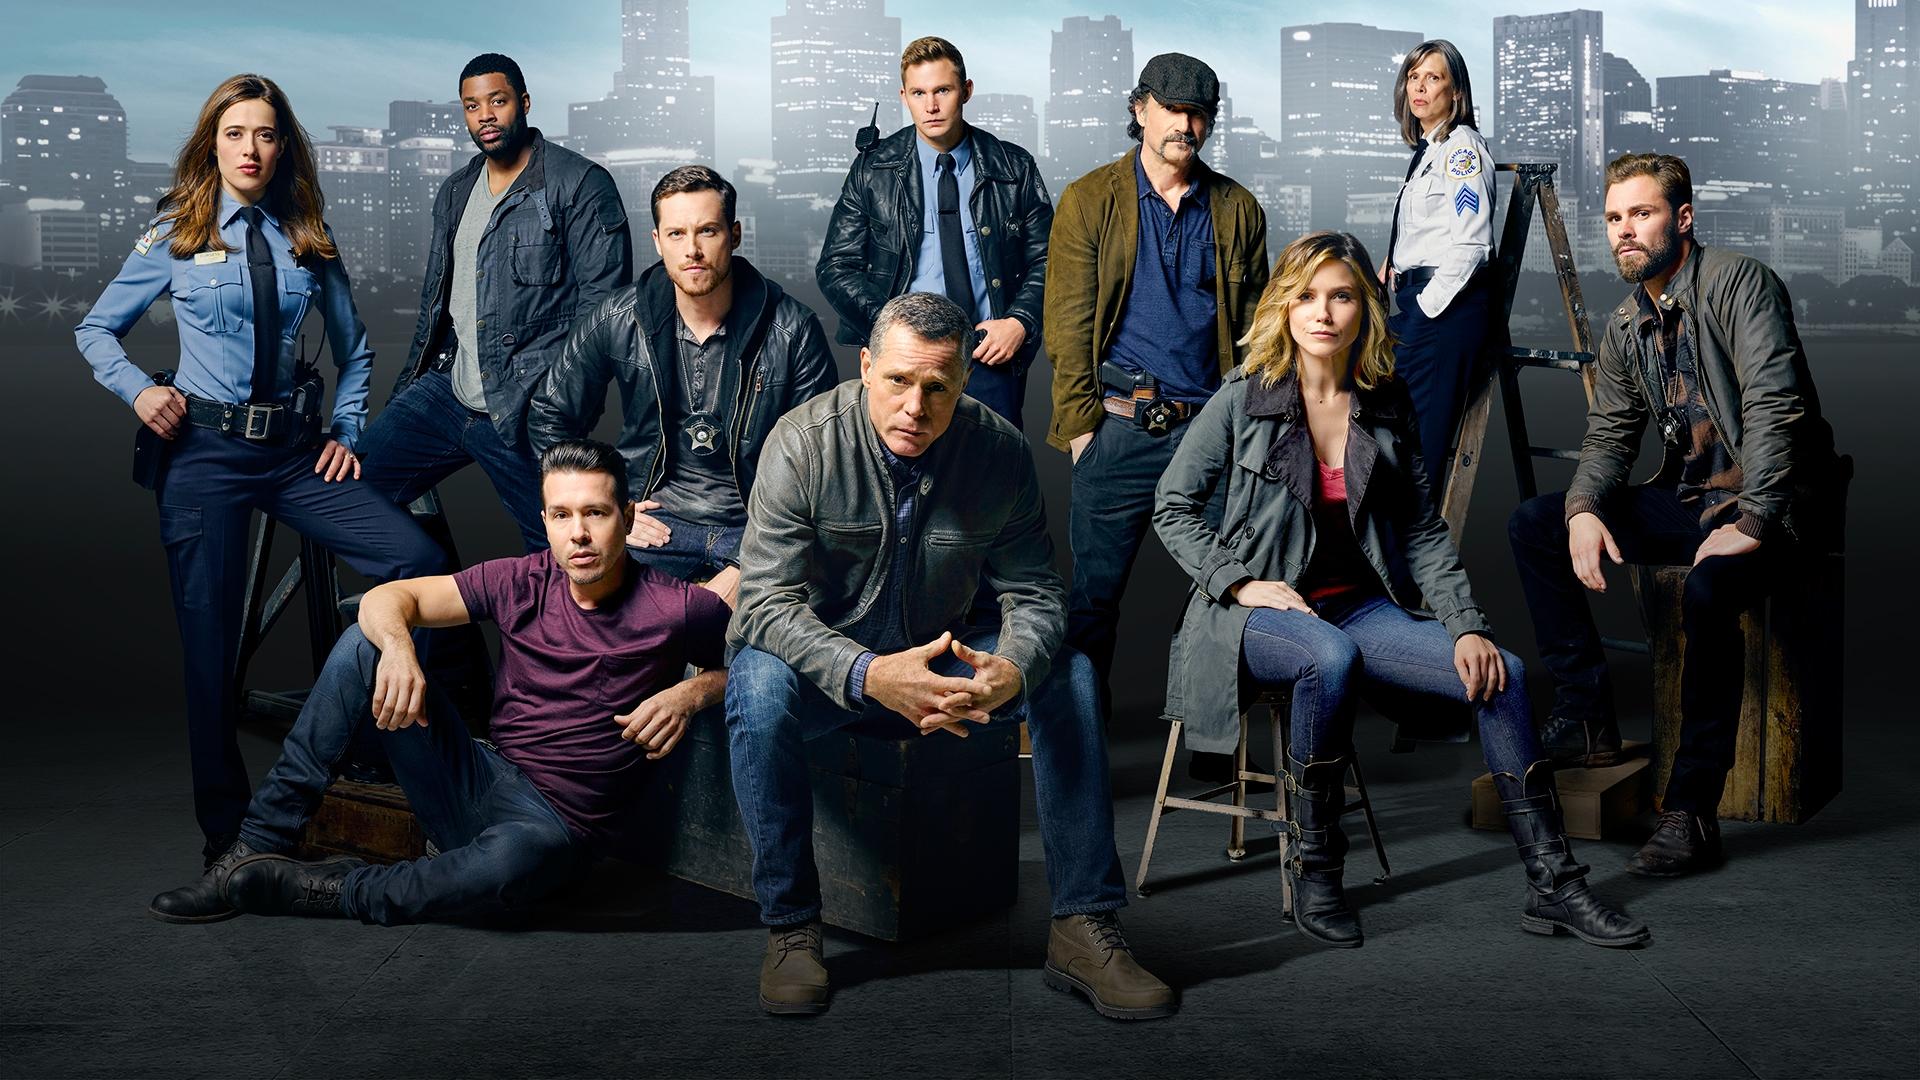 Chicago P.D. Wallpapers High Resolution and Quality Download 